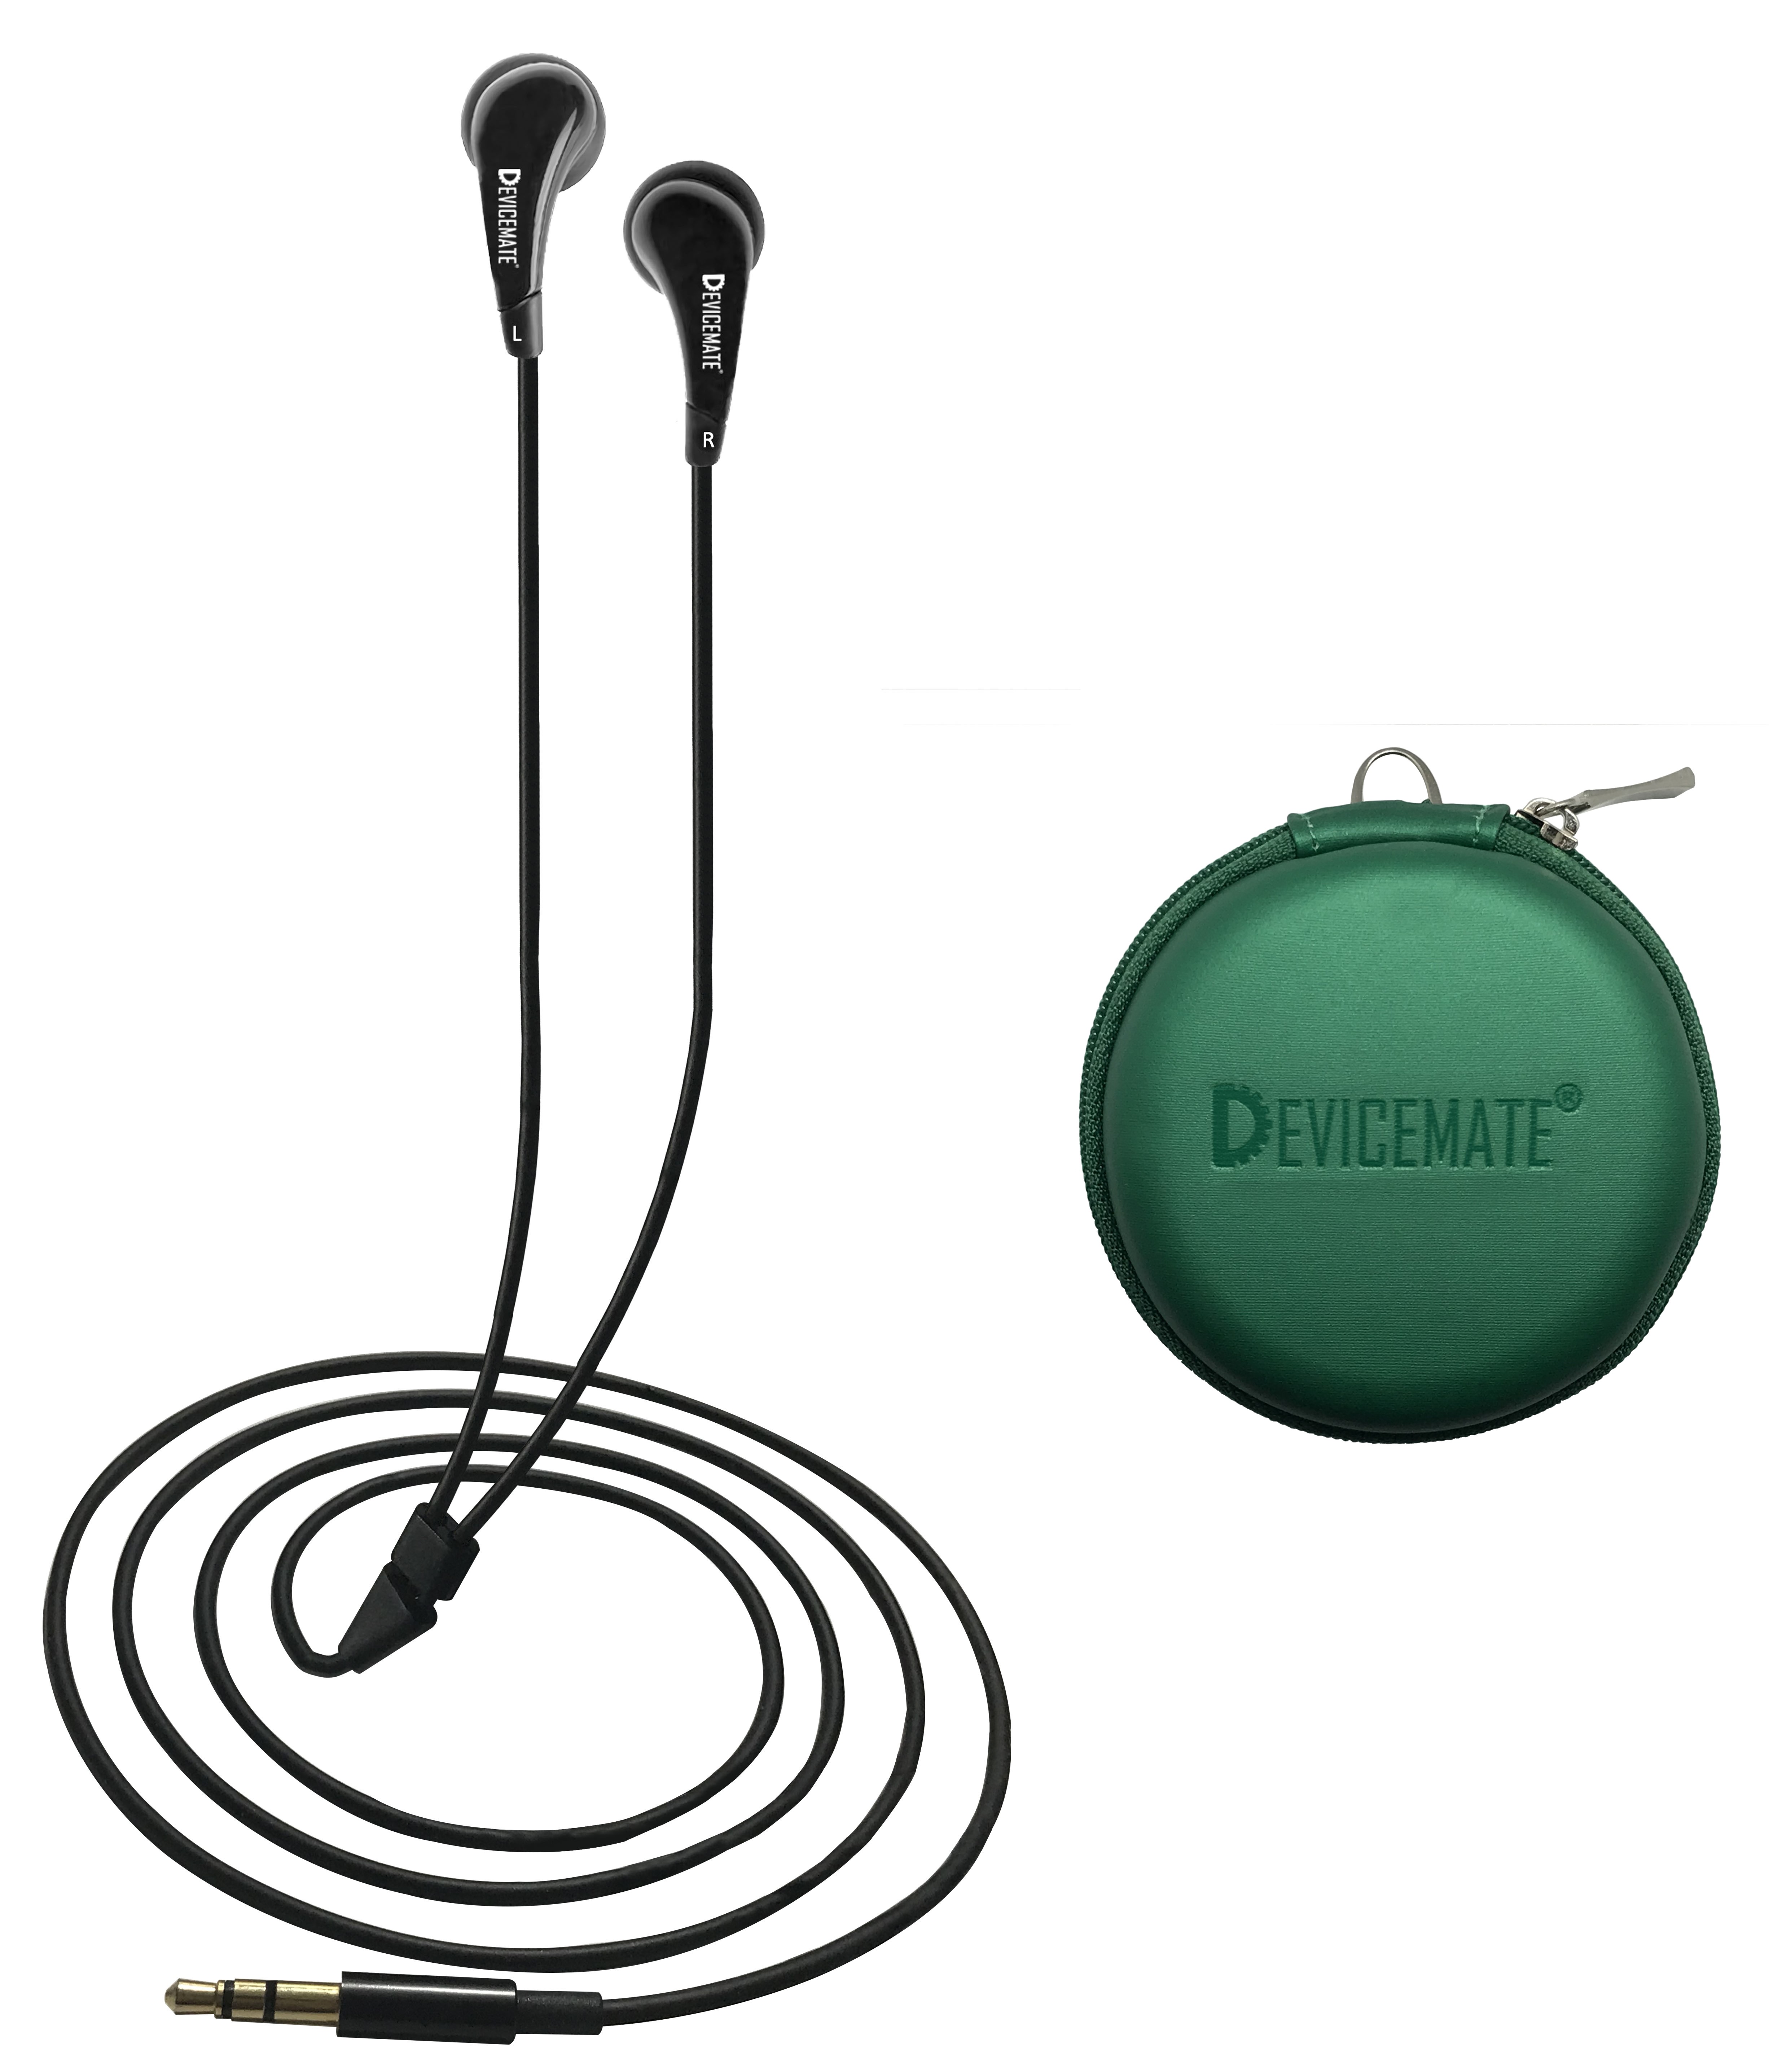 DEVICEMATE® SD 255-CLG In-Ear Stereo Earphone [Forest Green]Case